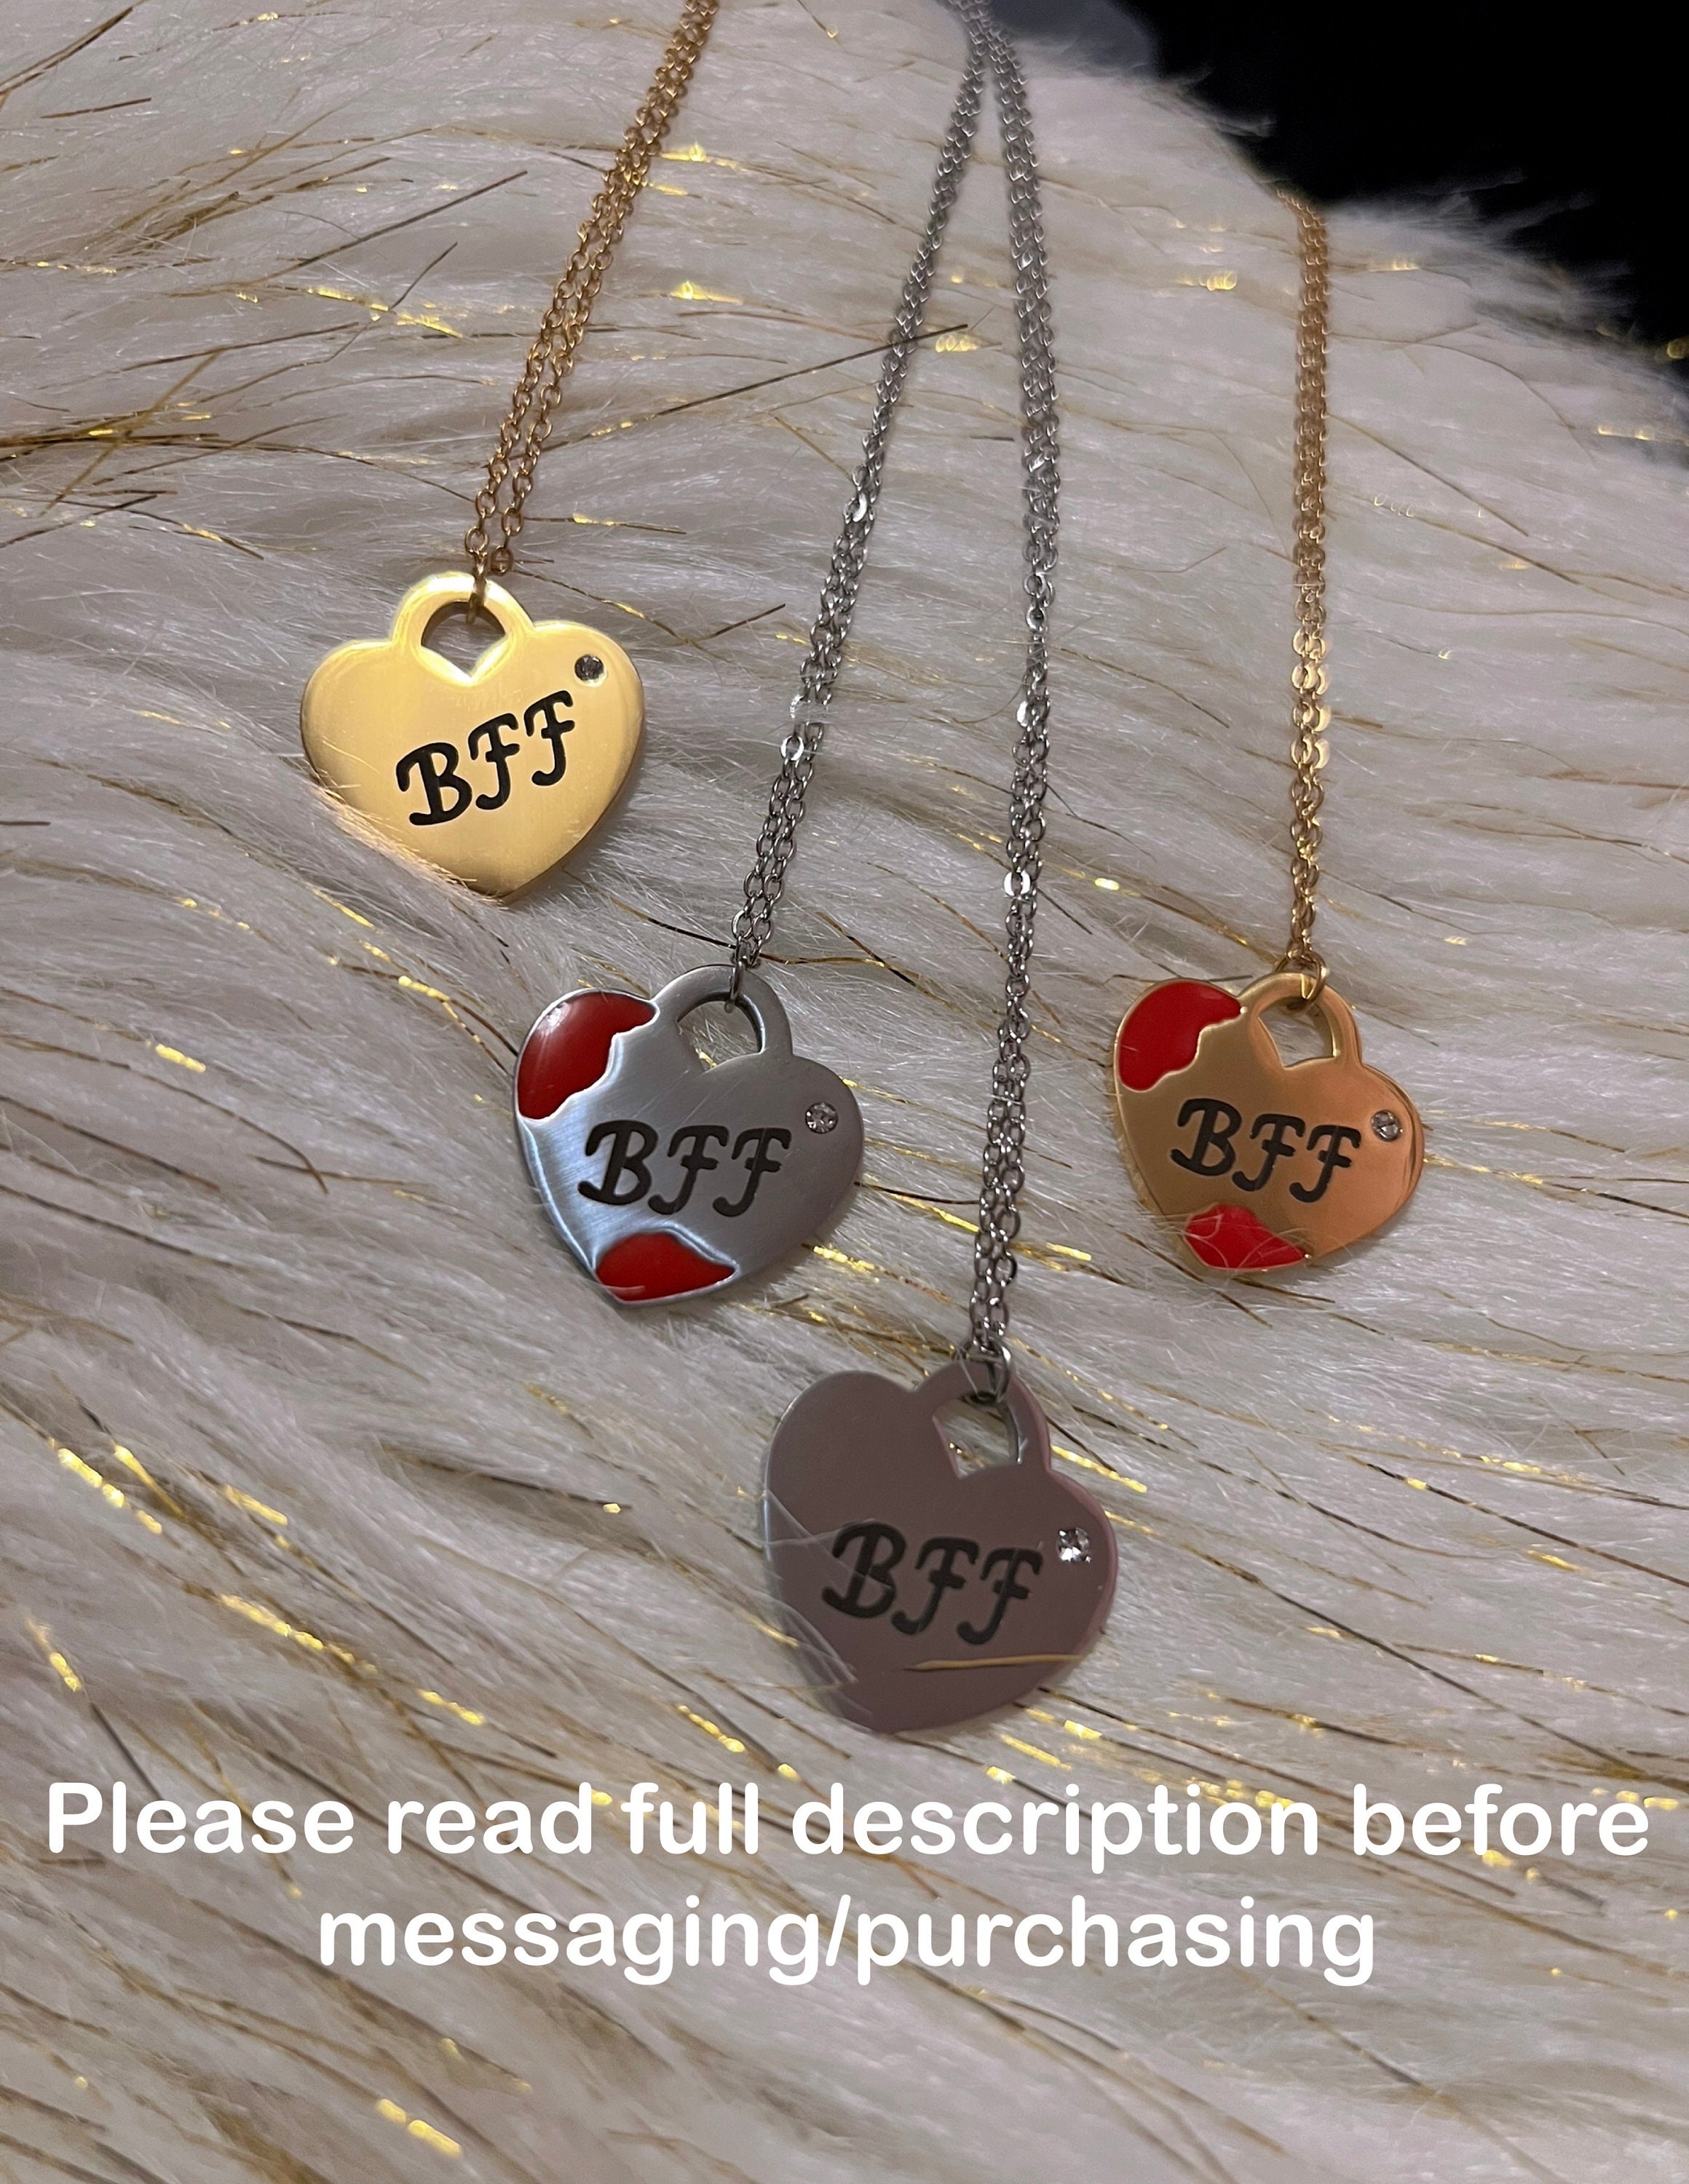 Fall in Love Necklace S00 - Fashion Jewelry